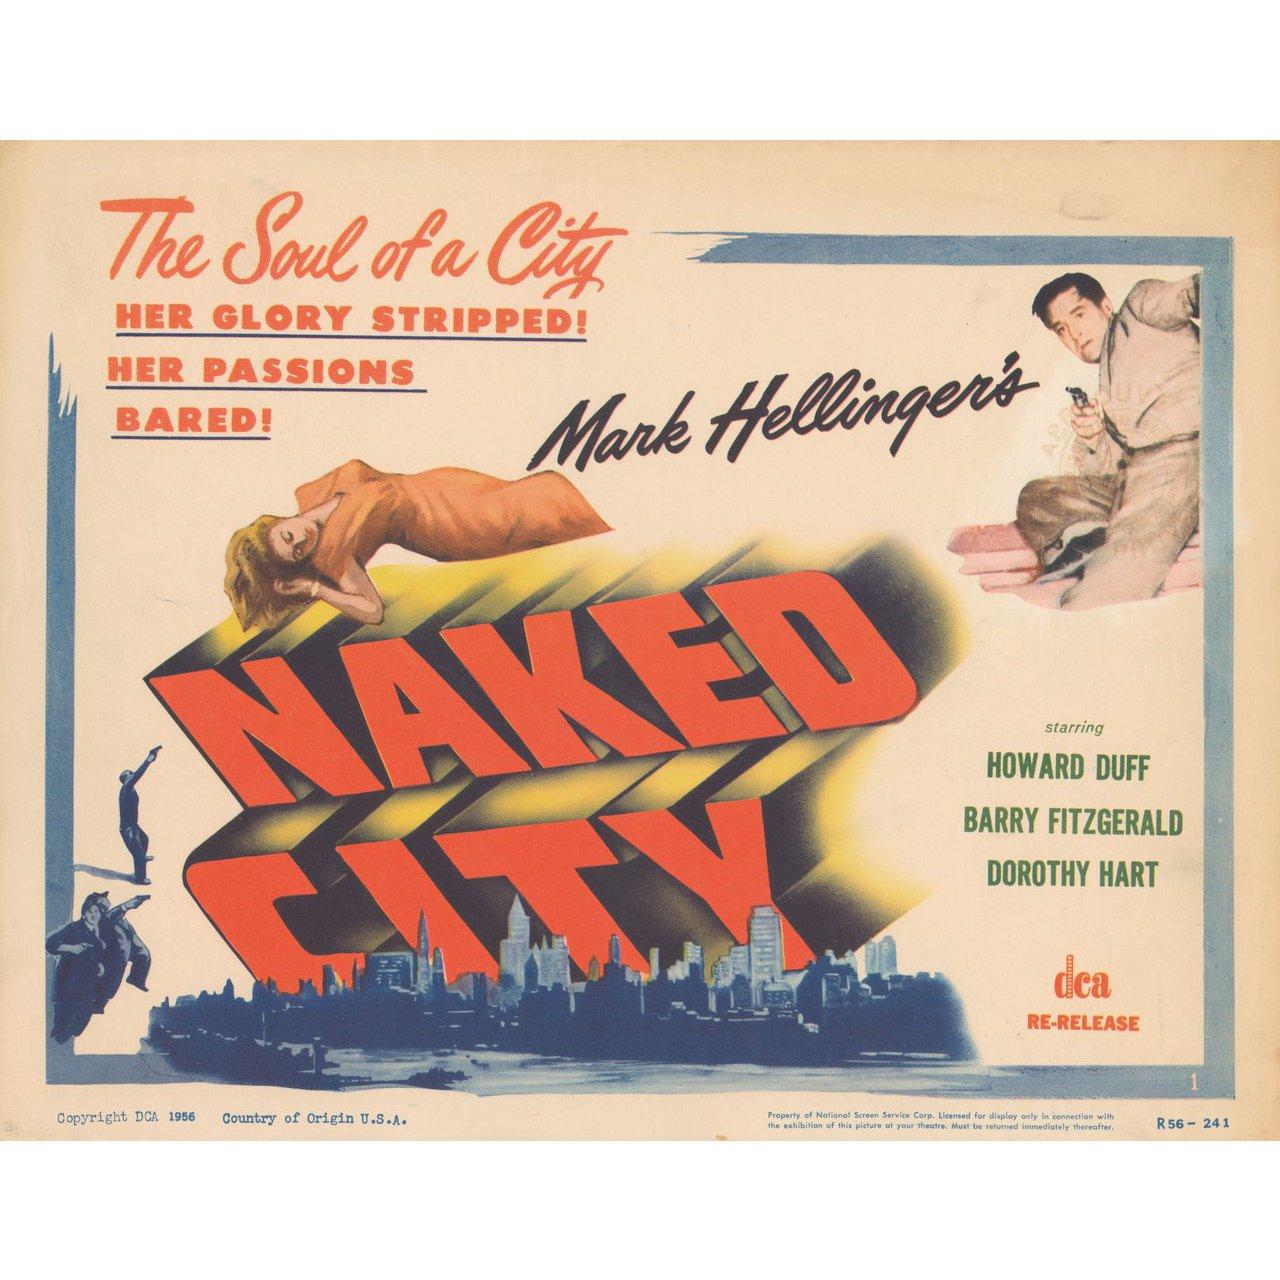 Original 1956 re-release U.S. title card for the 1948 film The Naked City directed by Jules Dassin with Barry Fitzgerald / Howard Duff / Dorothy Hart / Don Taylor. Very Good-Fine condition. Please note: the size is stated in inches and the actual